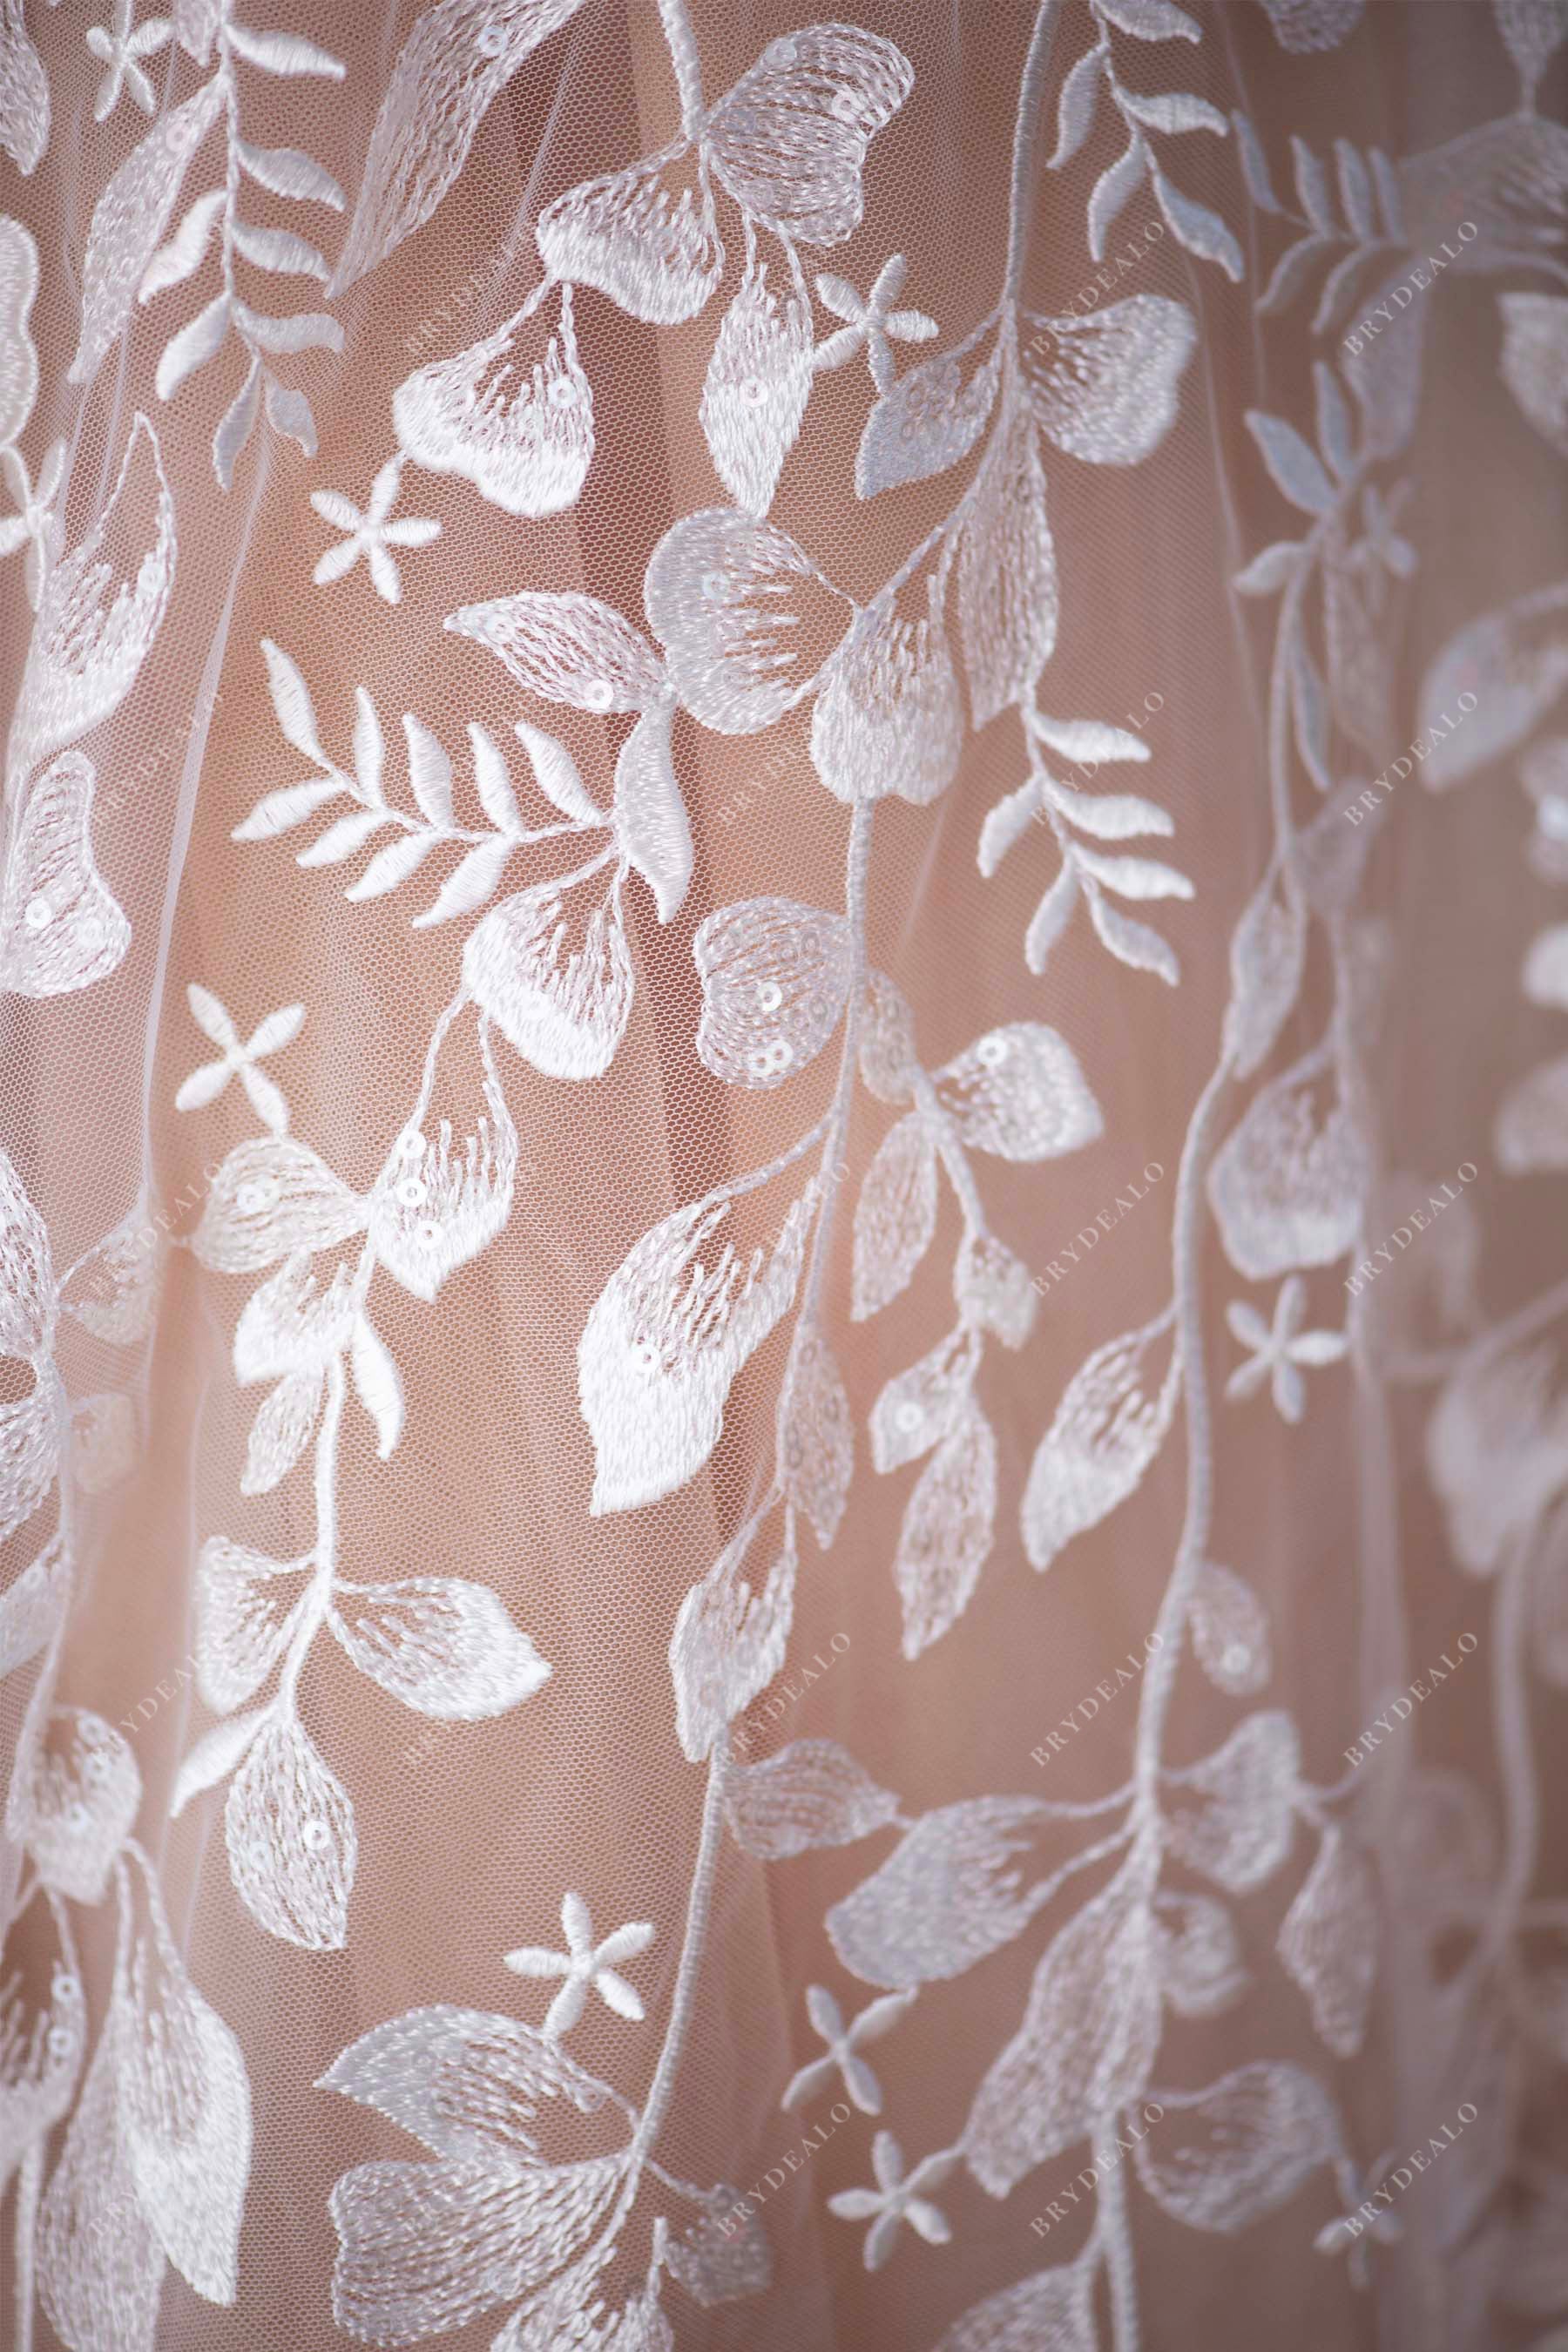 shimmery sequined flower leaf lace fabric for wholesale